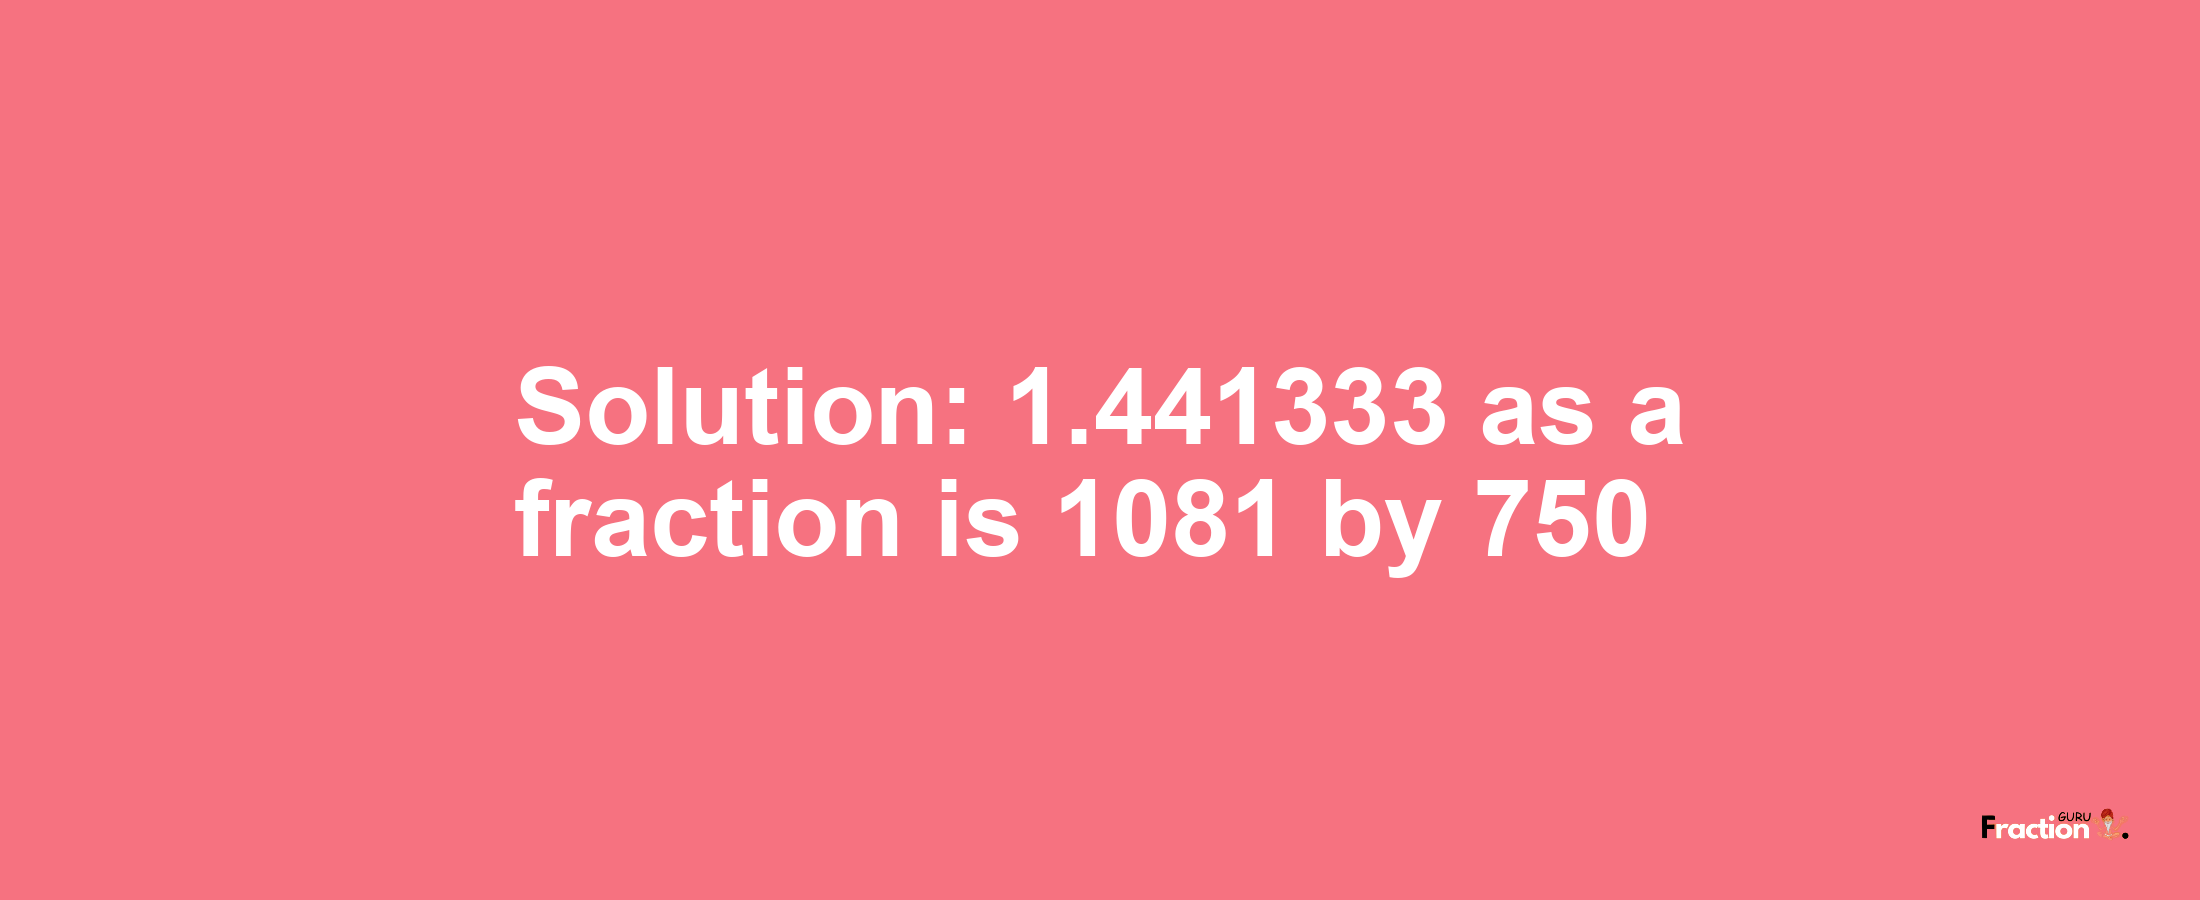 Solution:1.441333 as a fraction is 1081/750